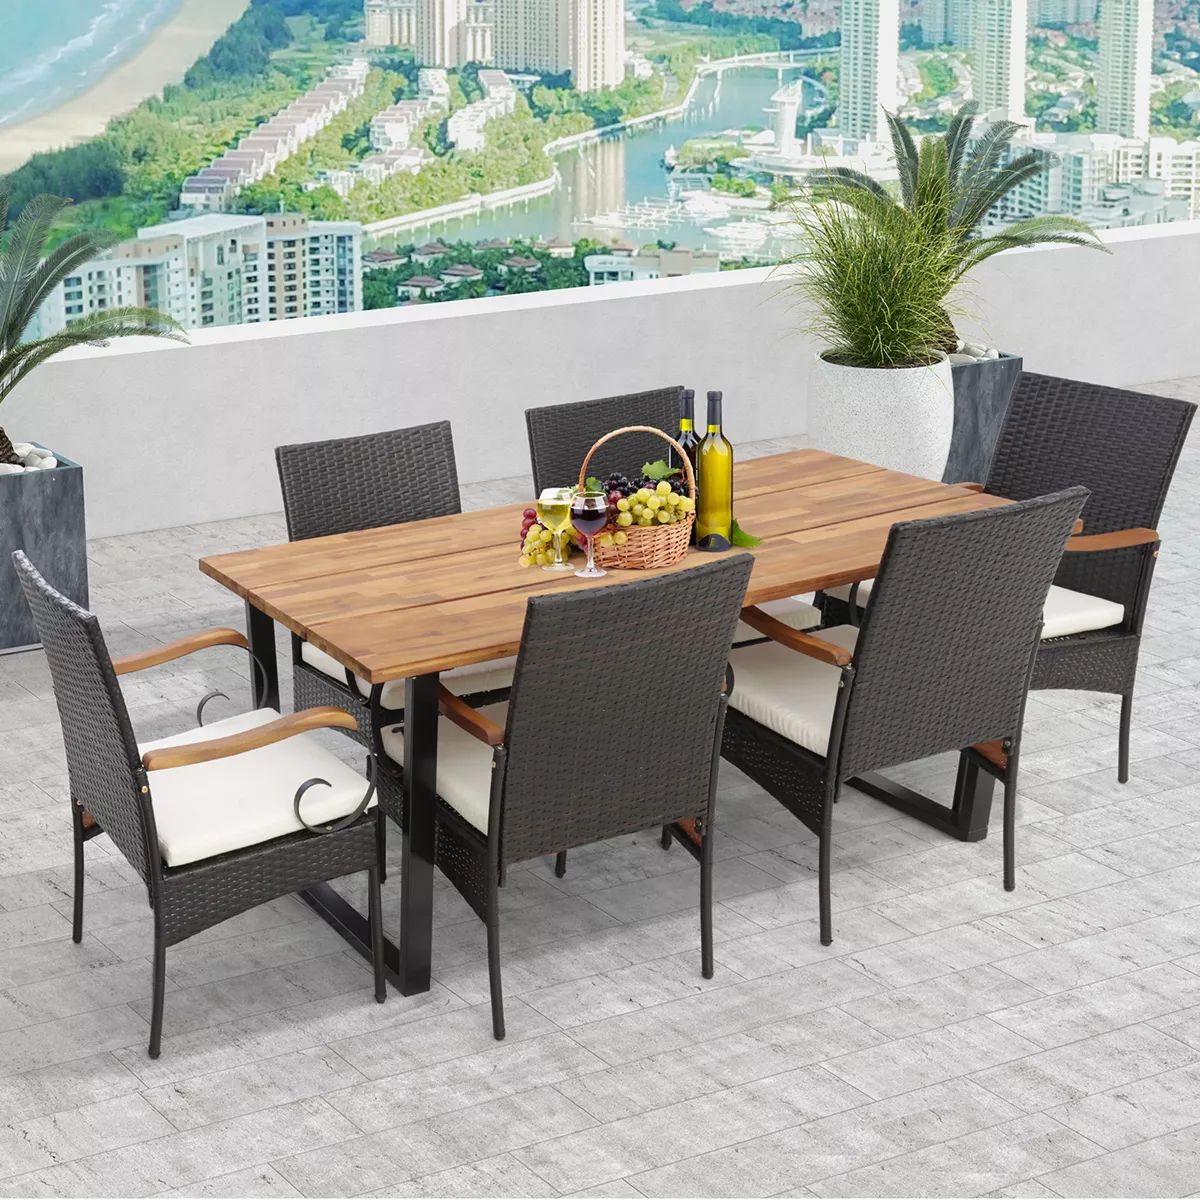 Costway 7 PCS Patio Rattan Dining Set Acacia Wood Table 6 Wicker Chairs with Umbrella Hole | Target